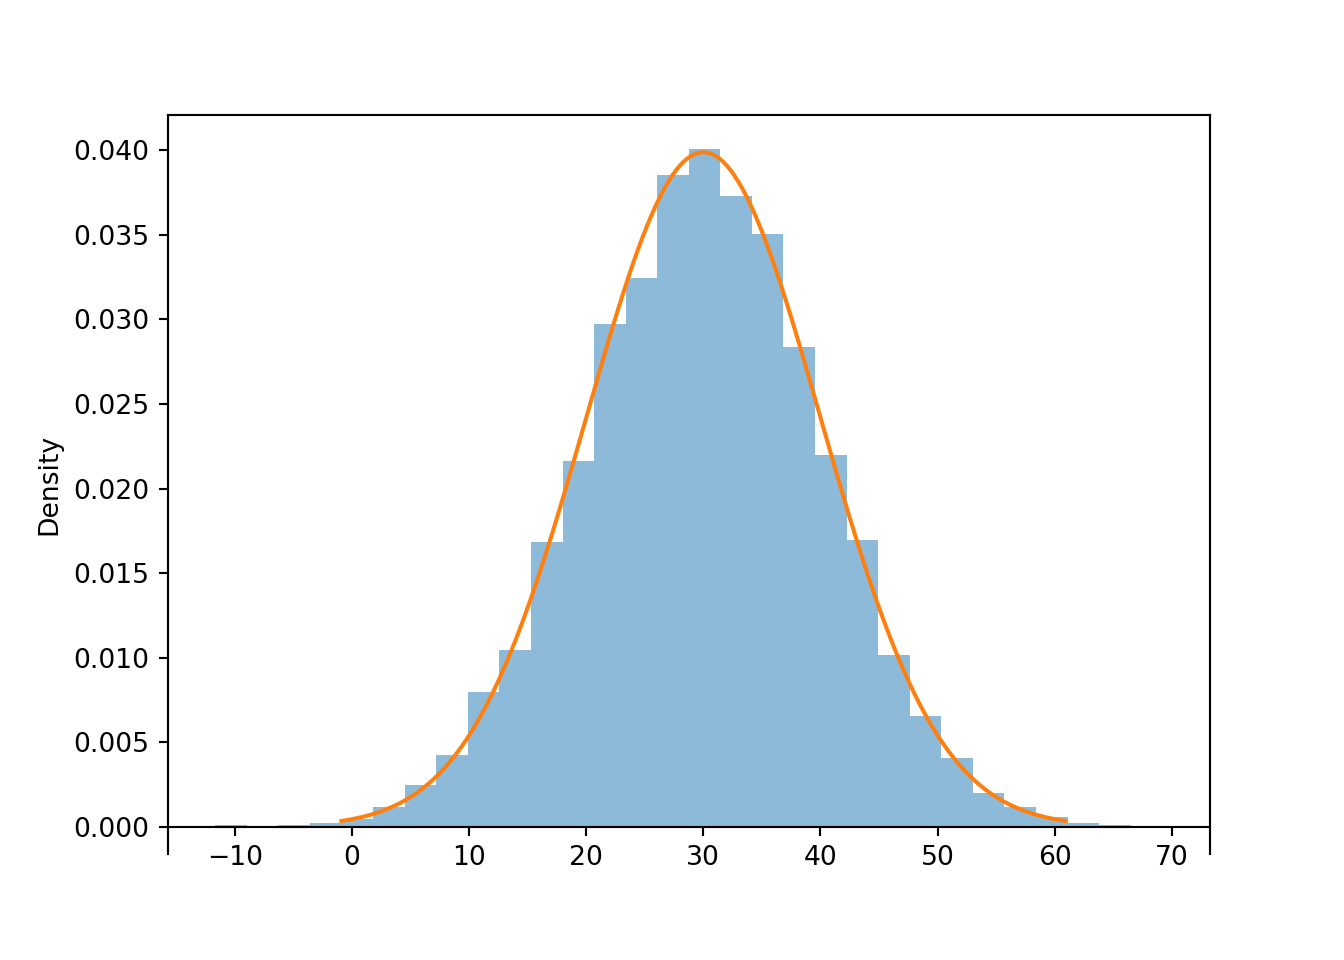 Histogram representing the approximate distribution of values simulated using the spinner in Figure 2.14. The smooth solid curve models the theoretical shape of the distribution, called the “Normal(30, 10)” distribution.